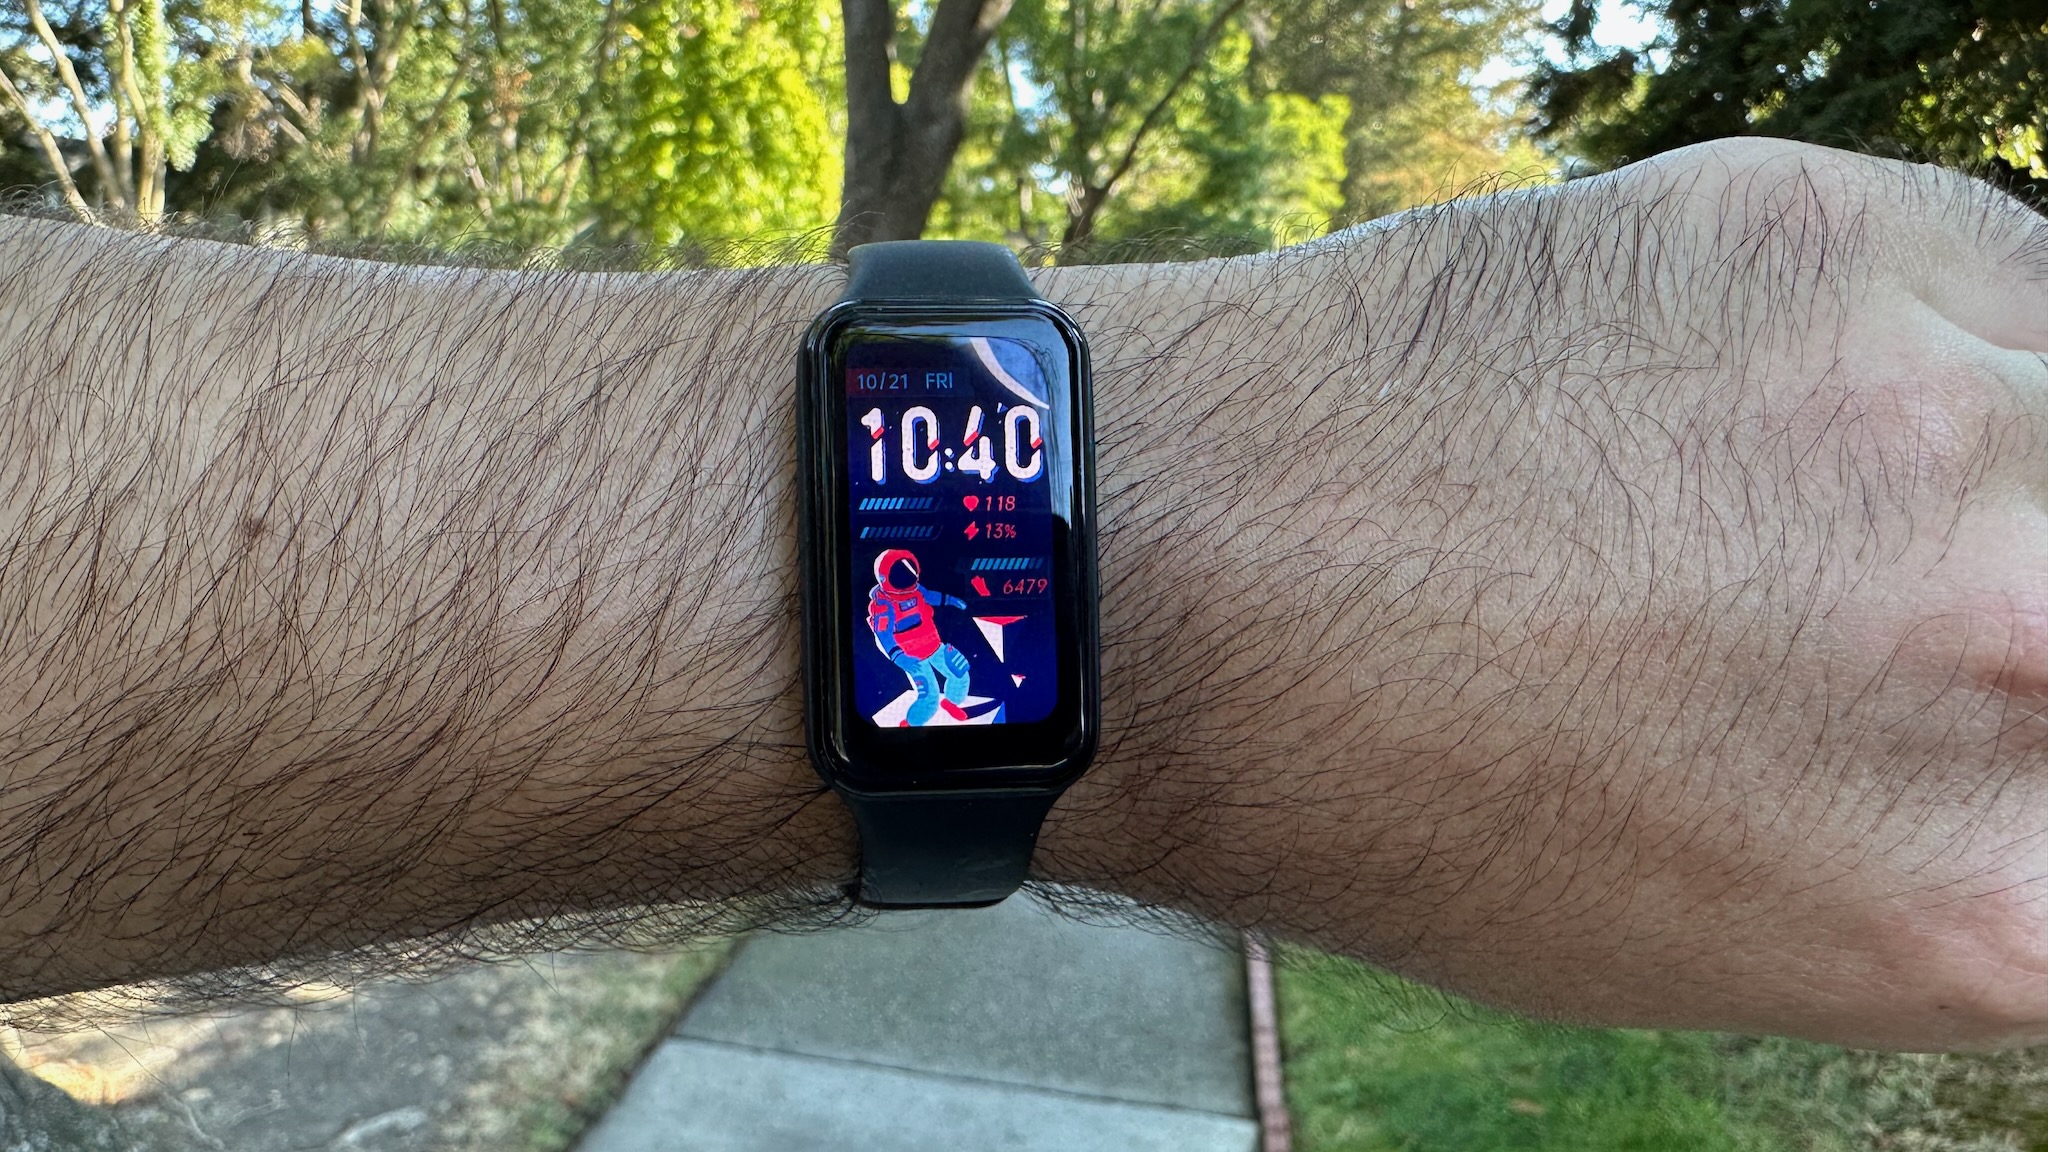 A custom watch face on the Amazfit Band 7